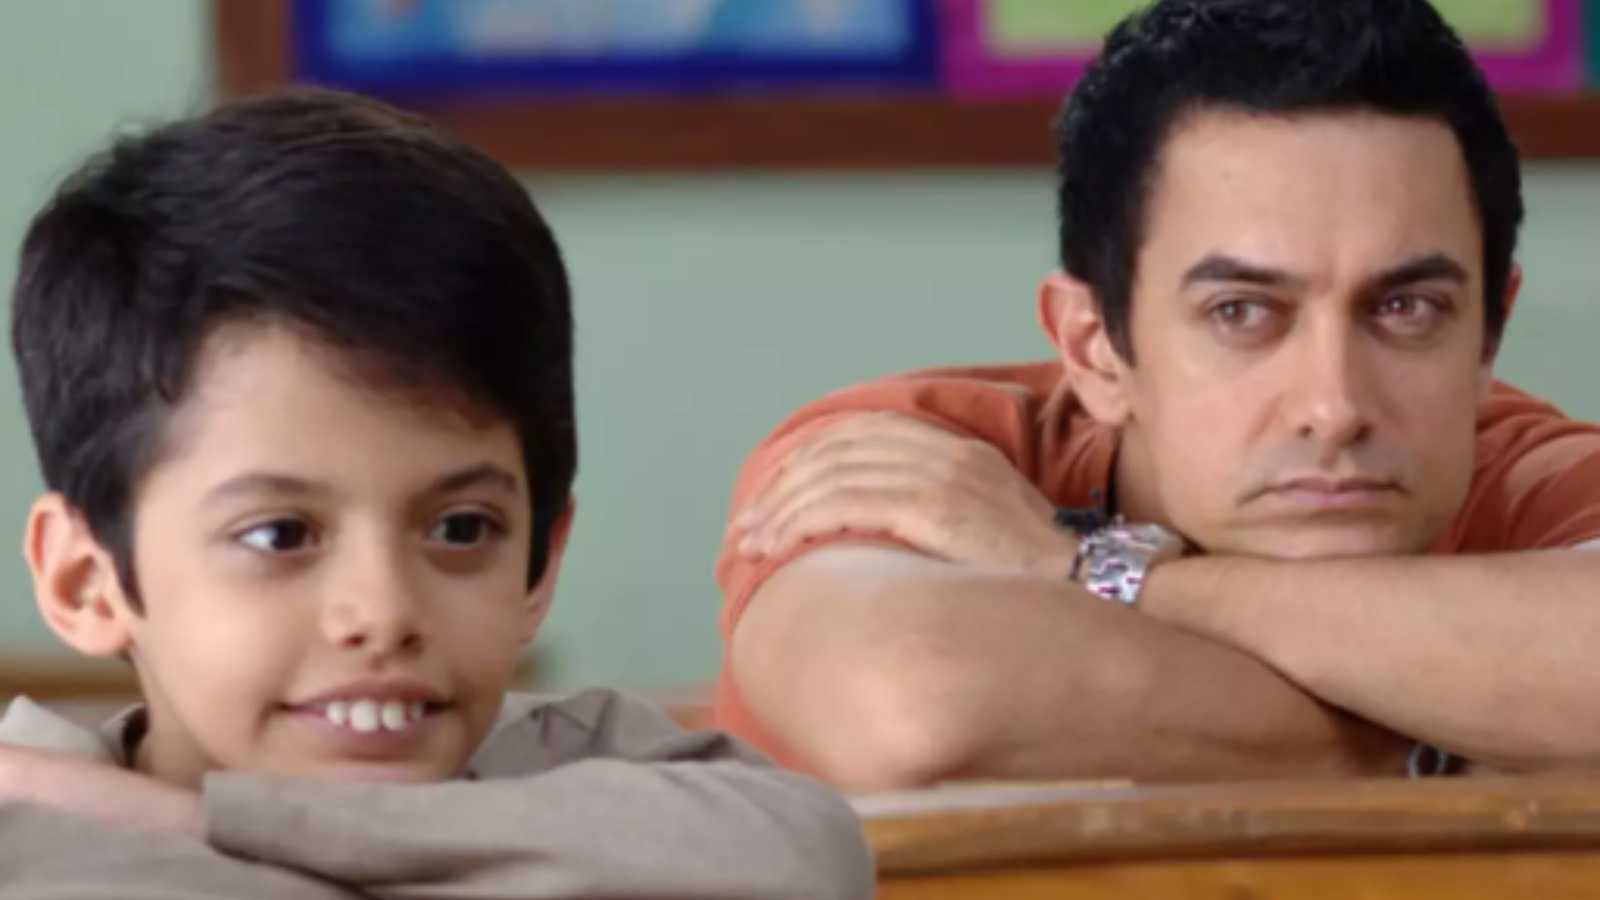 'Aamir Khan himself is a flop artist now' : Netizens troll the actor after Darsheel Safary talks about asking work from him